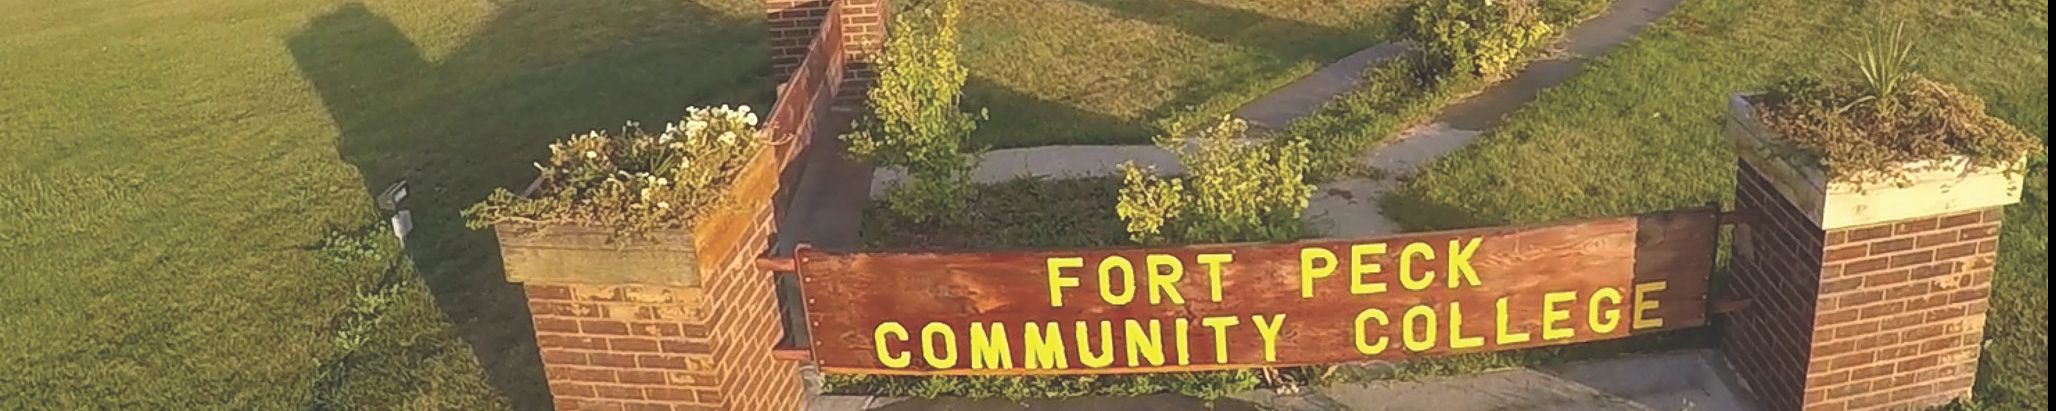 Campus sign for Fort Peck Community College in Poplar MT